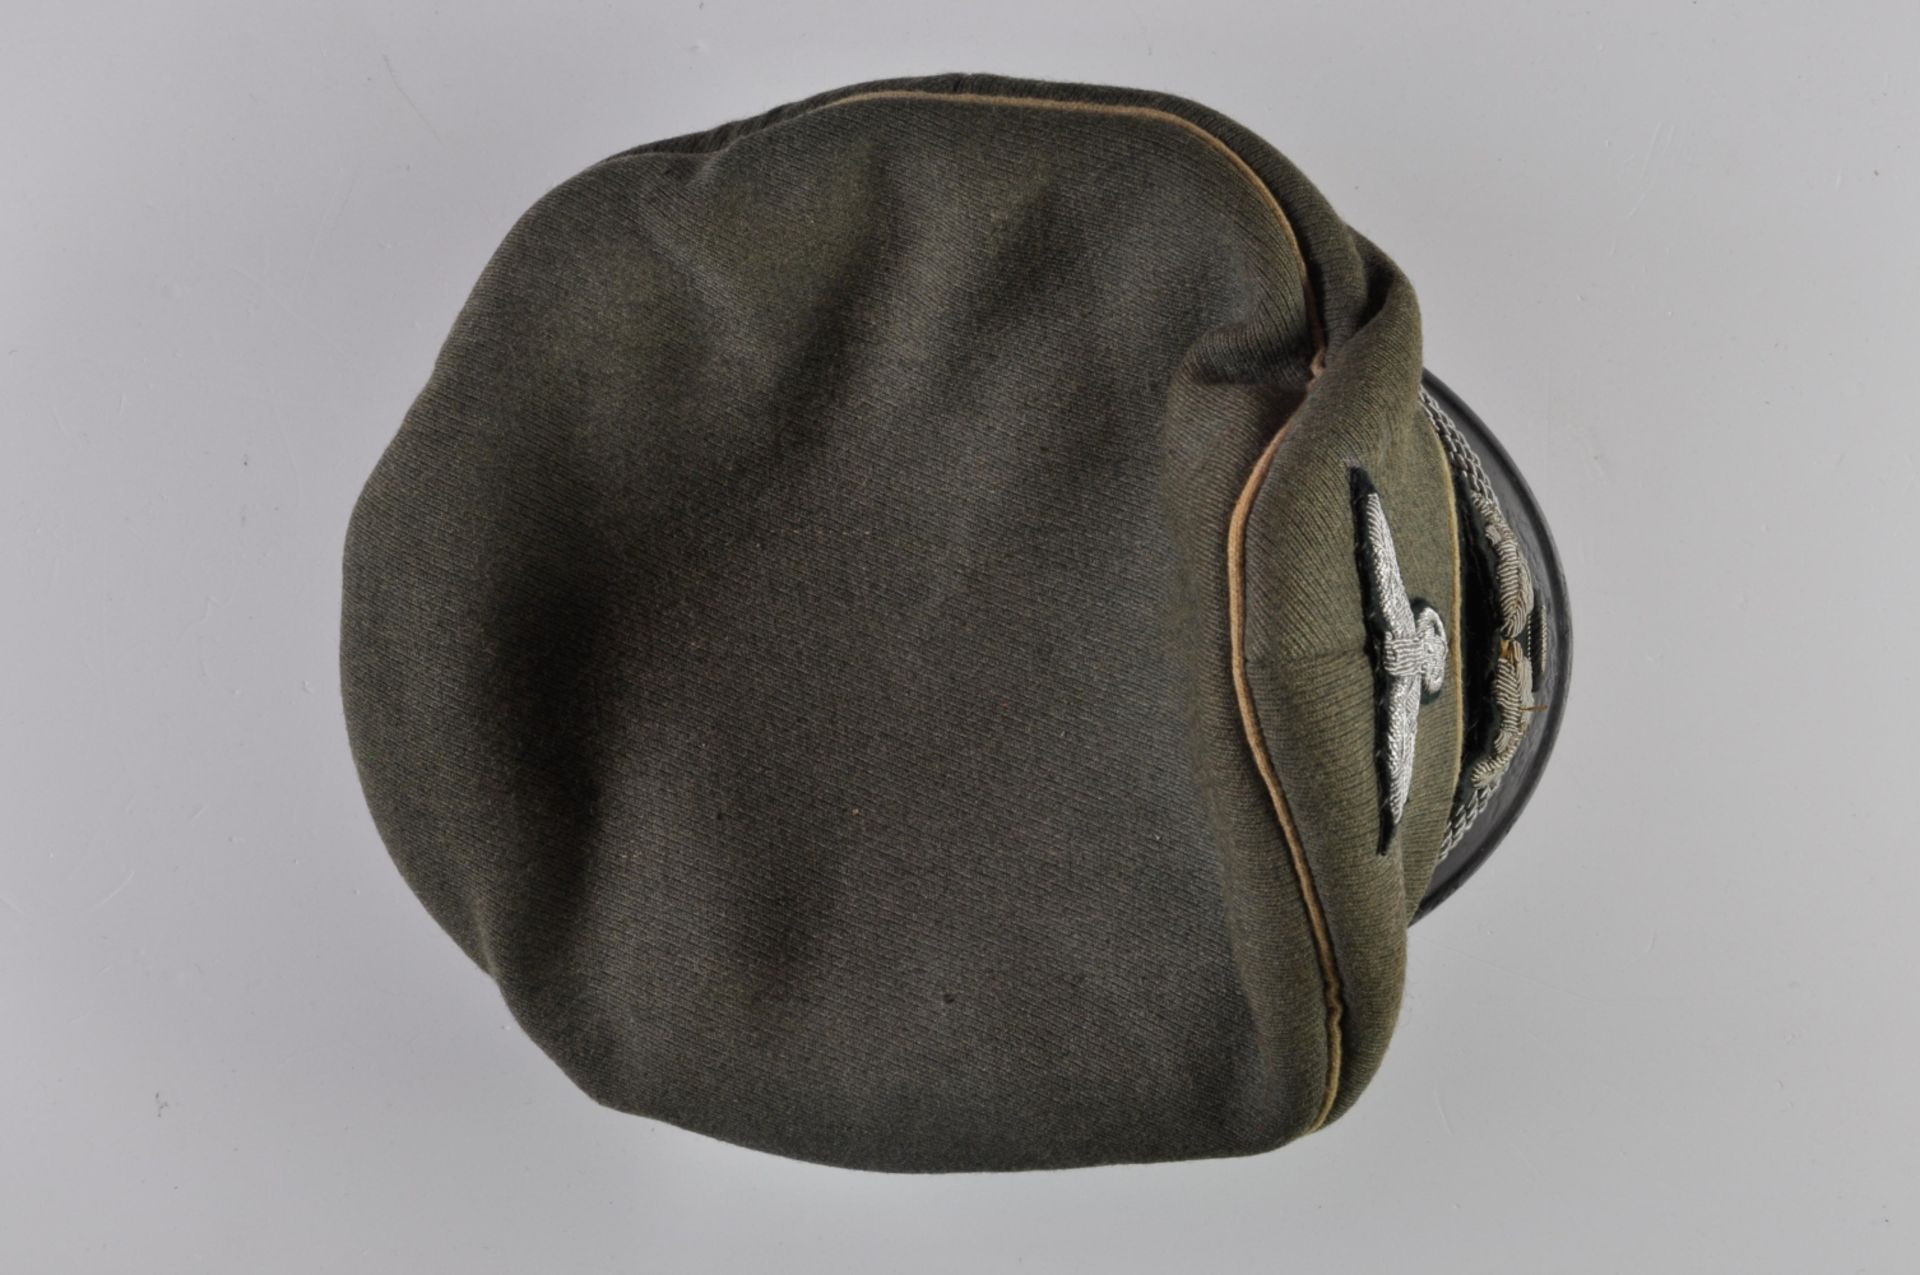 German Armed Forces Army, peaked cap for officers the infantry, field gray fine cloth complete - Image 3 of 4